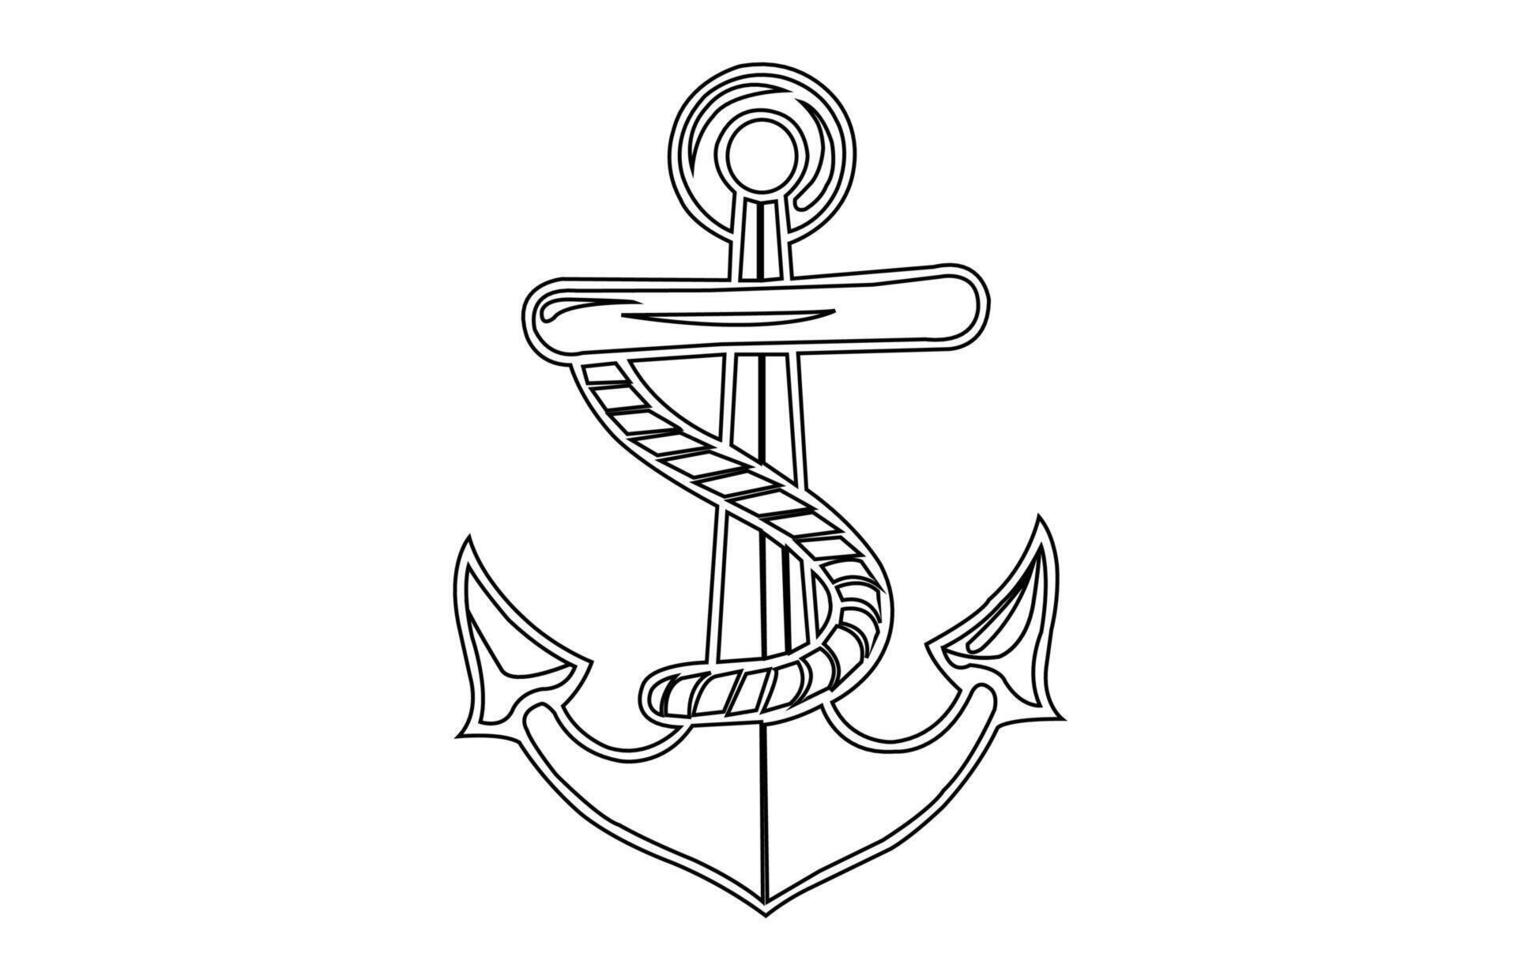 Anchors outline isolated on white, Hand drawn vector nautical anchor icon.